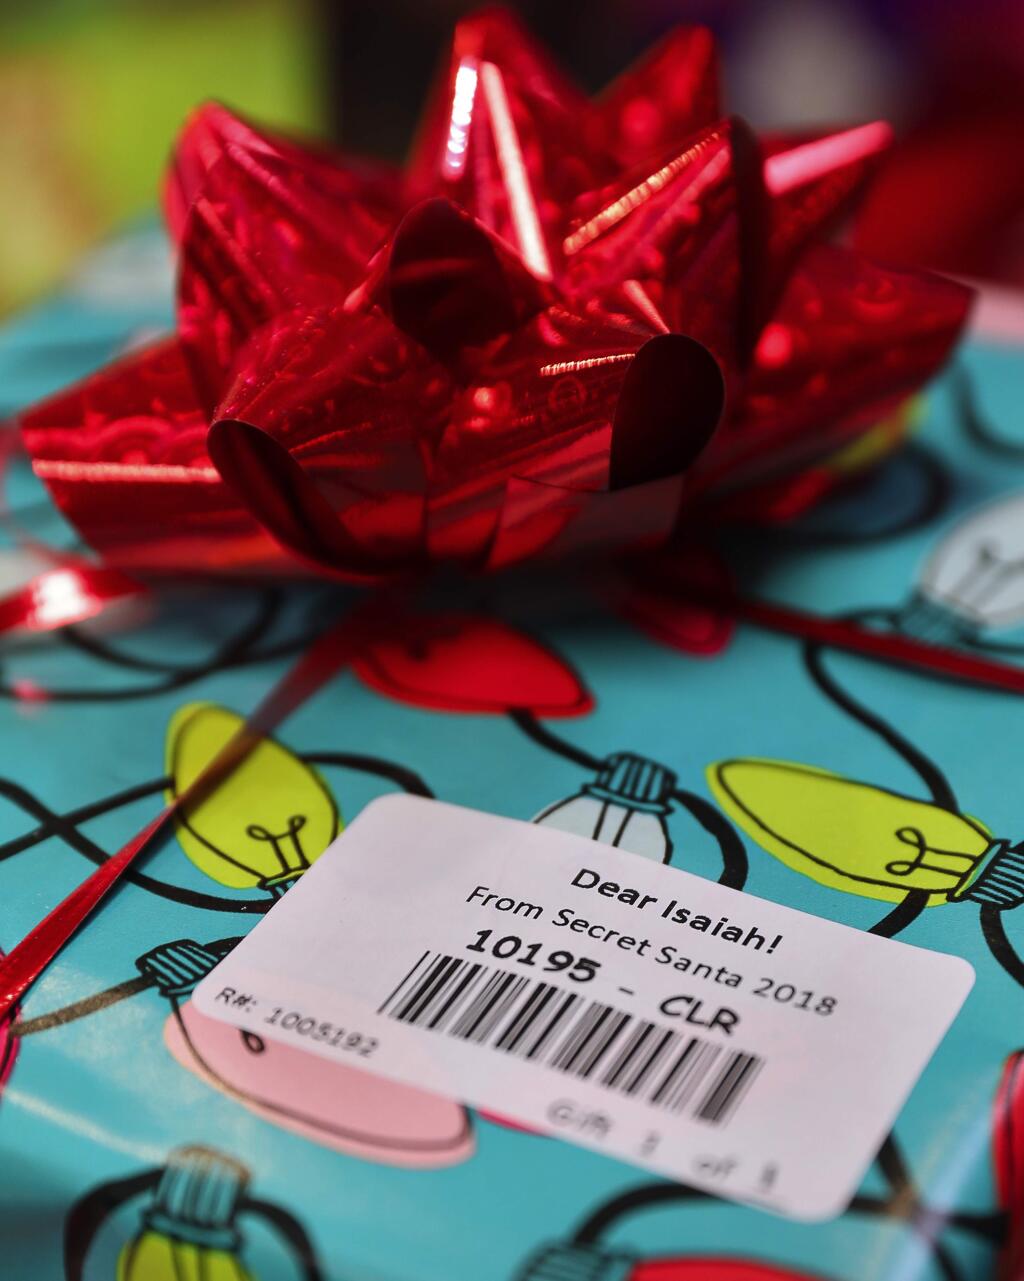 Heart wishes and Secret Santa gifts are now barcoded as part of the new digital-friendly ways for people to donate. (Christopher Chung/ The Press Democrat)